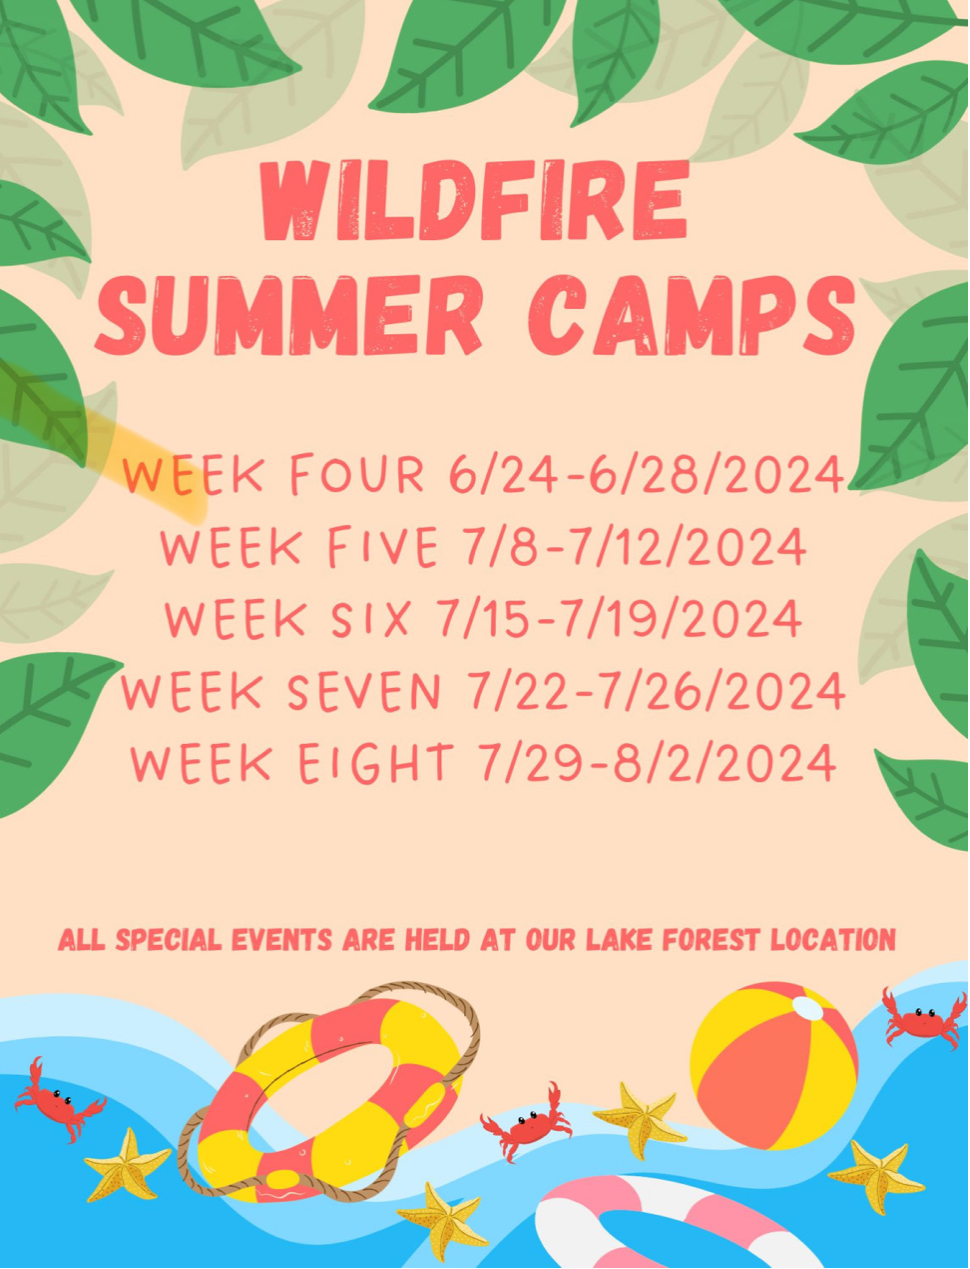 Summer Camps at Wildfire Lake Forest!